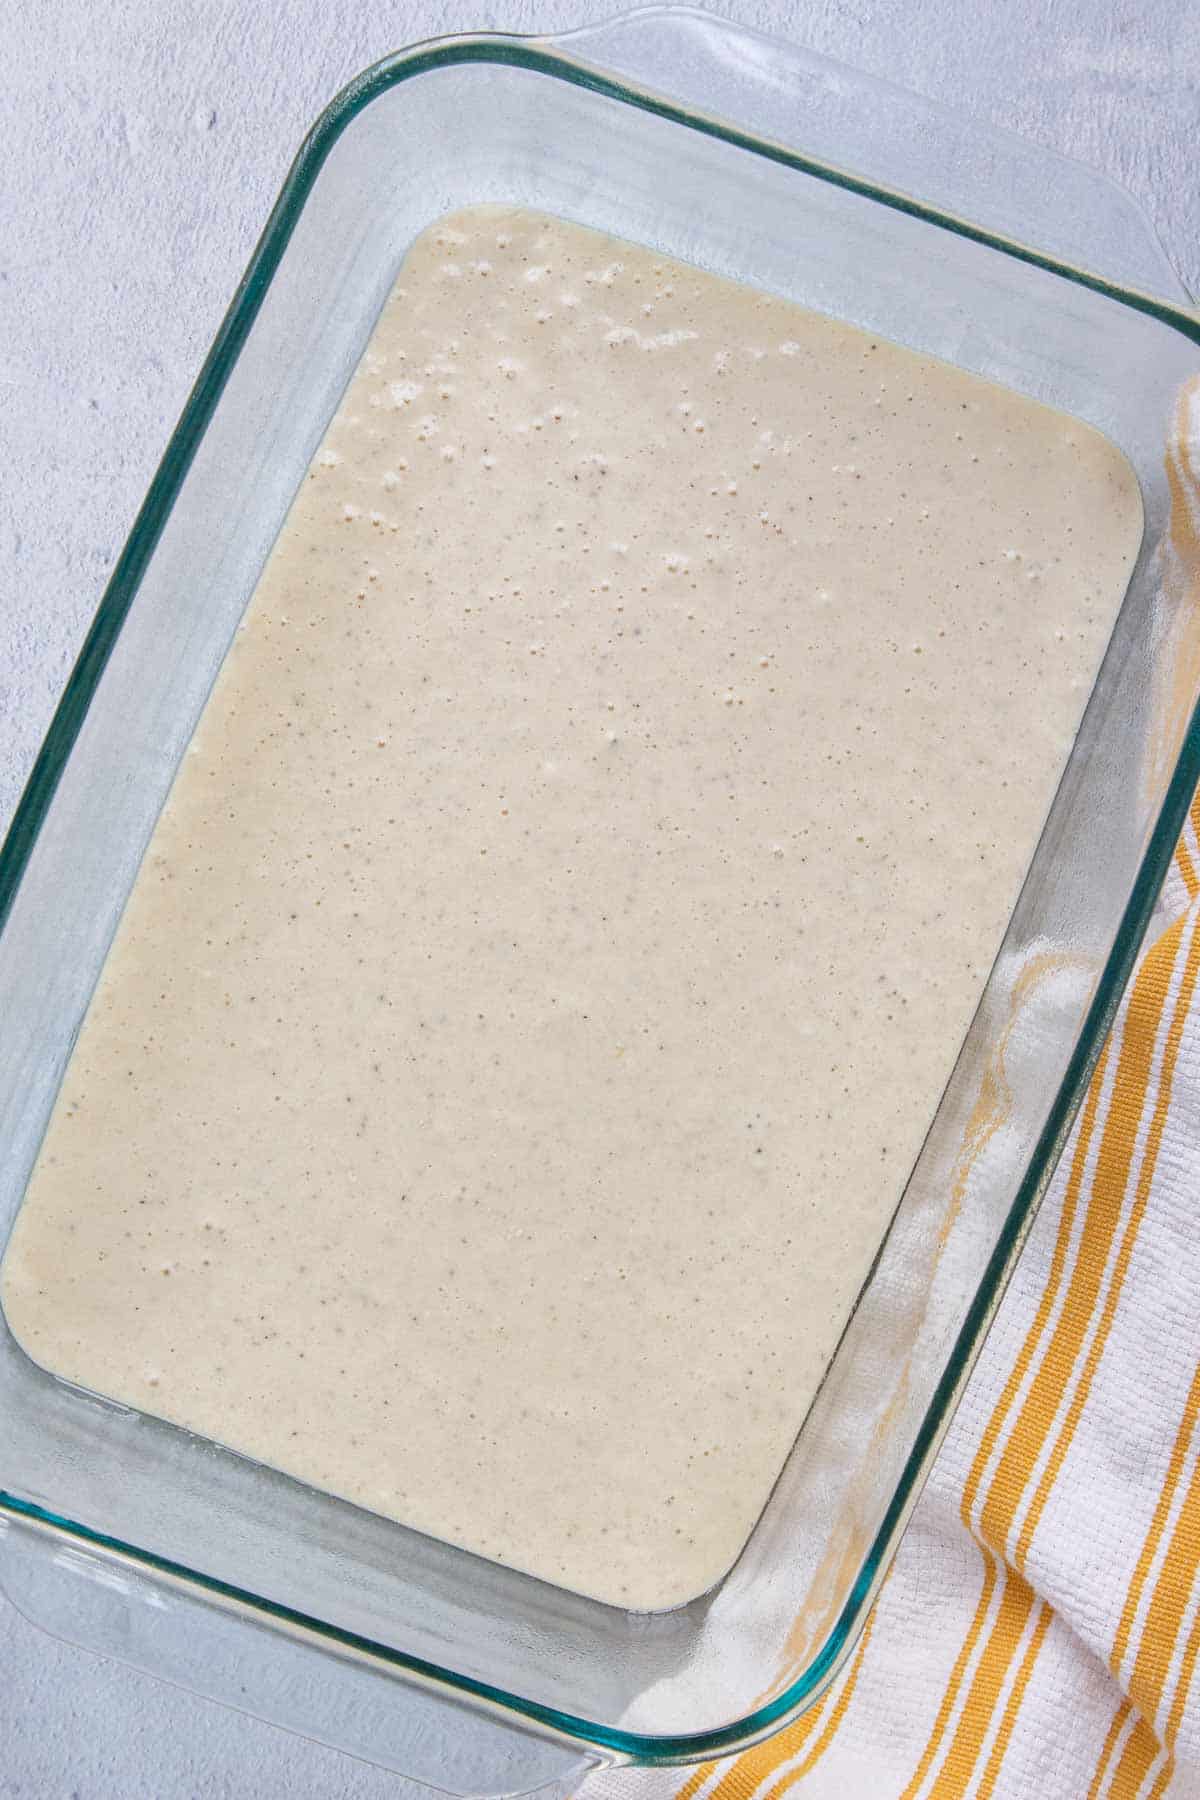 Bisquick mixture in a 9 by 13 baking dish